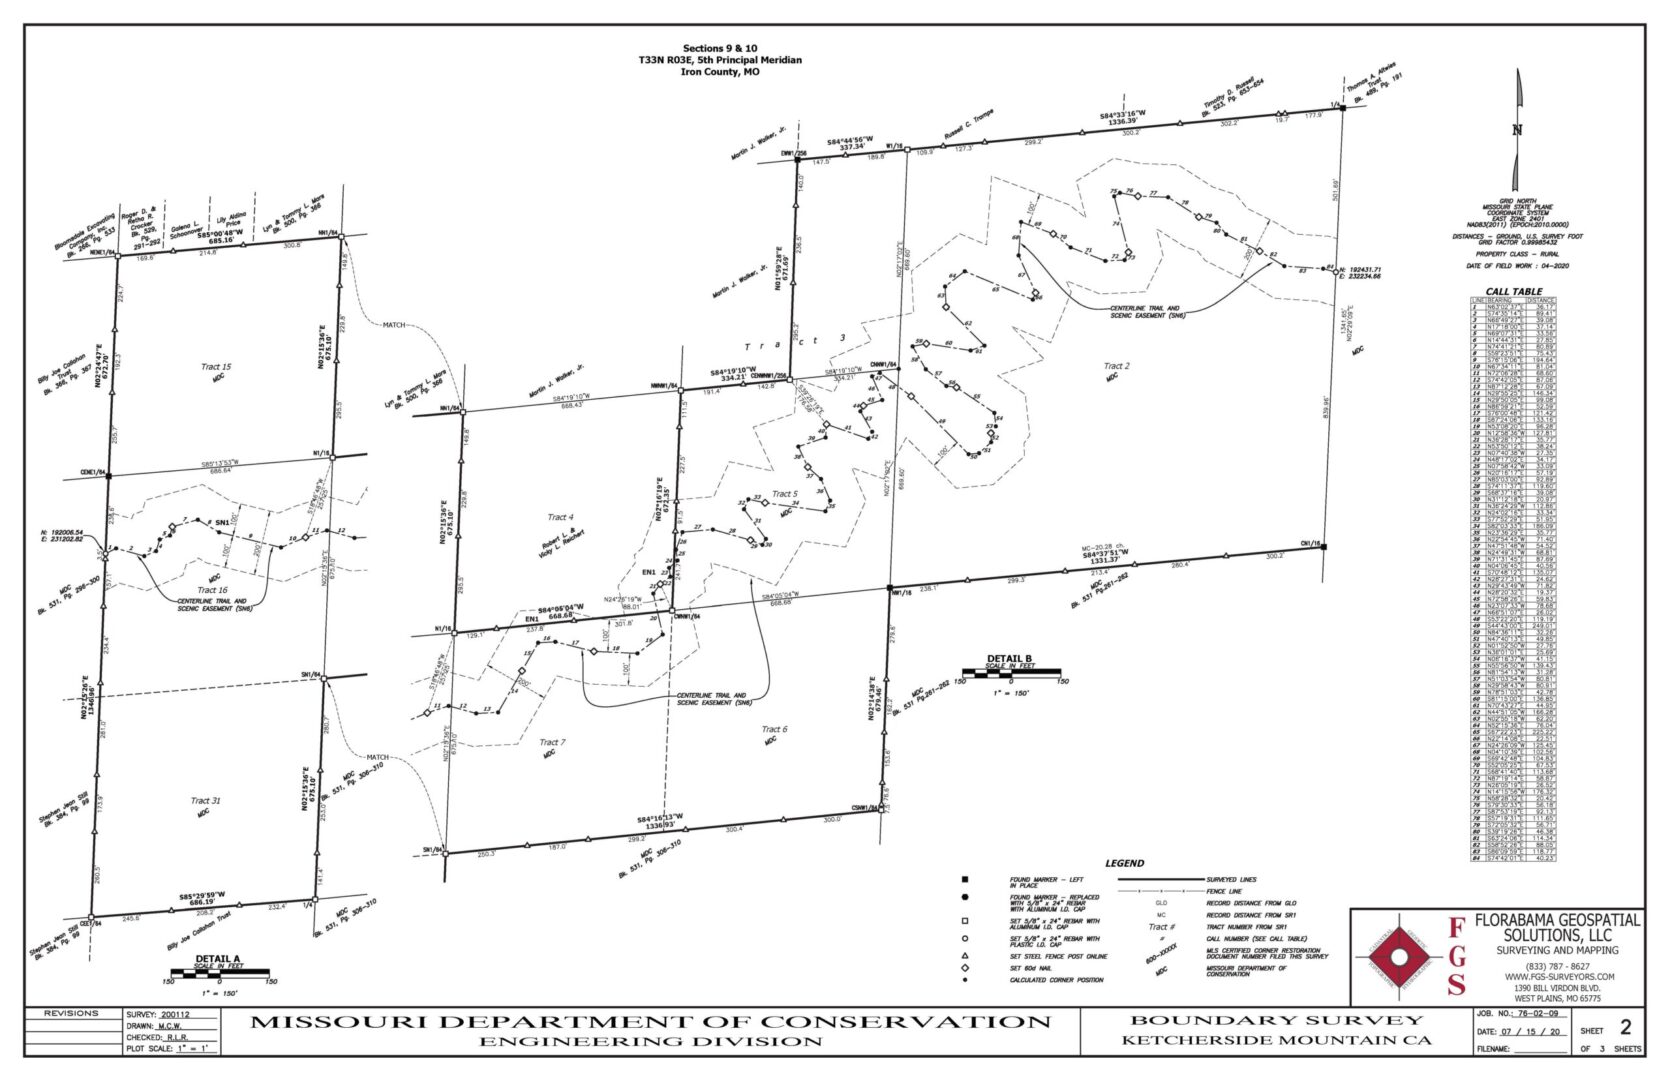 200112 MDC - Iron County - Ketcherside Mountain - Missouri Department of Conservation - GRID - PLAT_Page_2